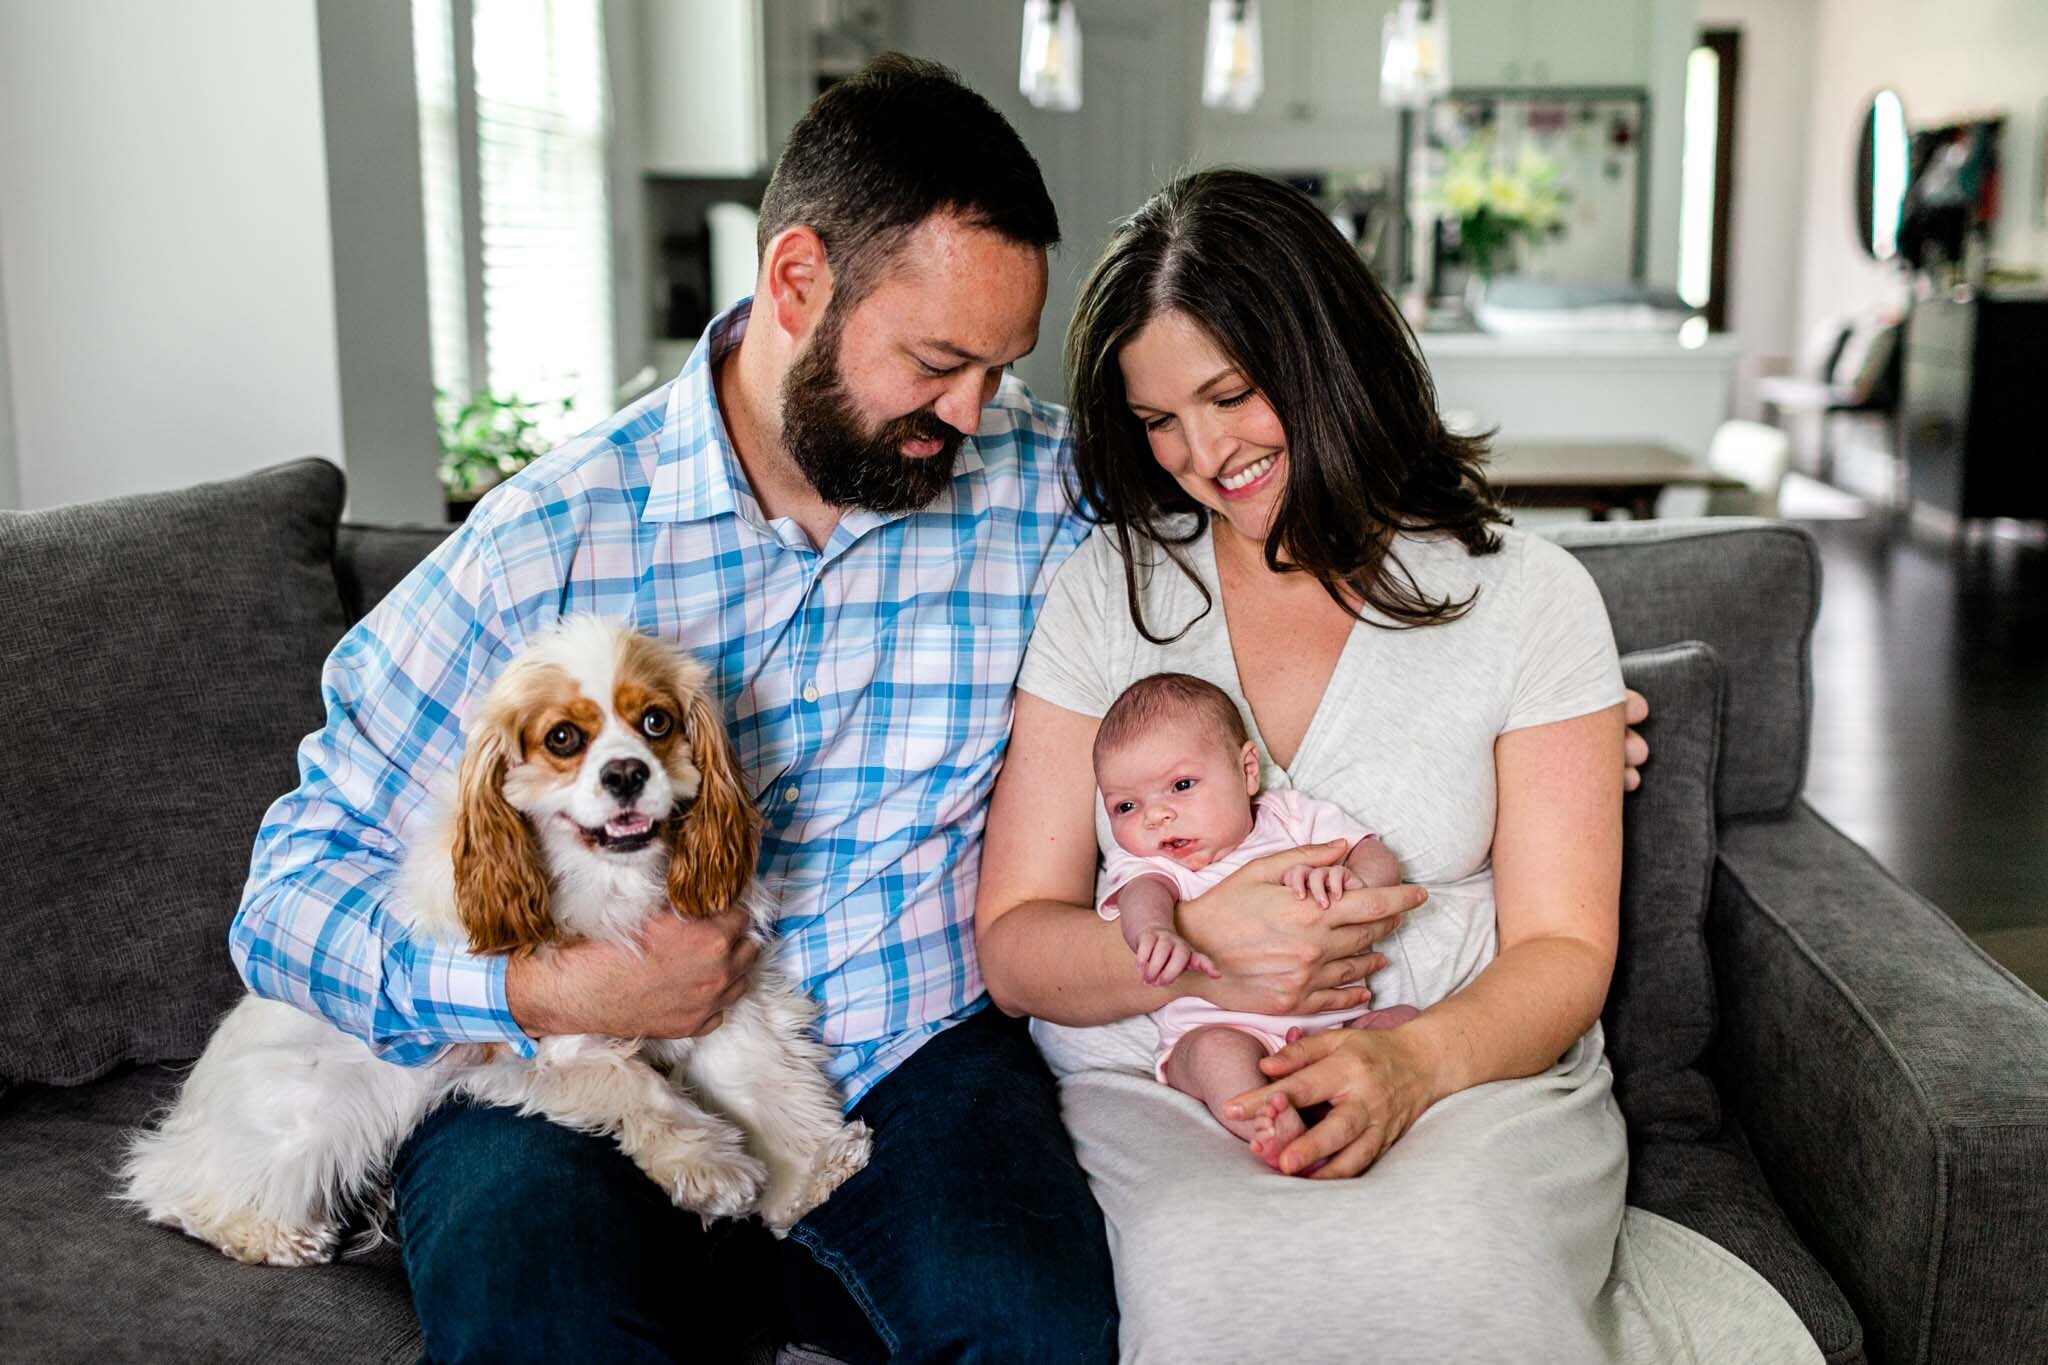 Durham Newborn Photographer | By G. Lin Photography | Family sitting on couch with dog and baby